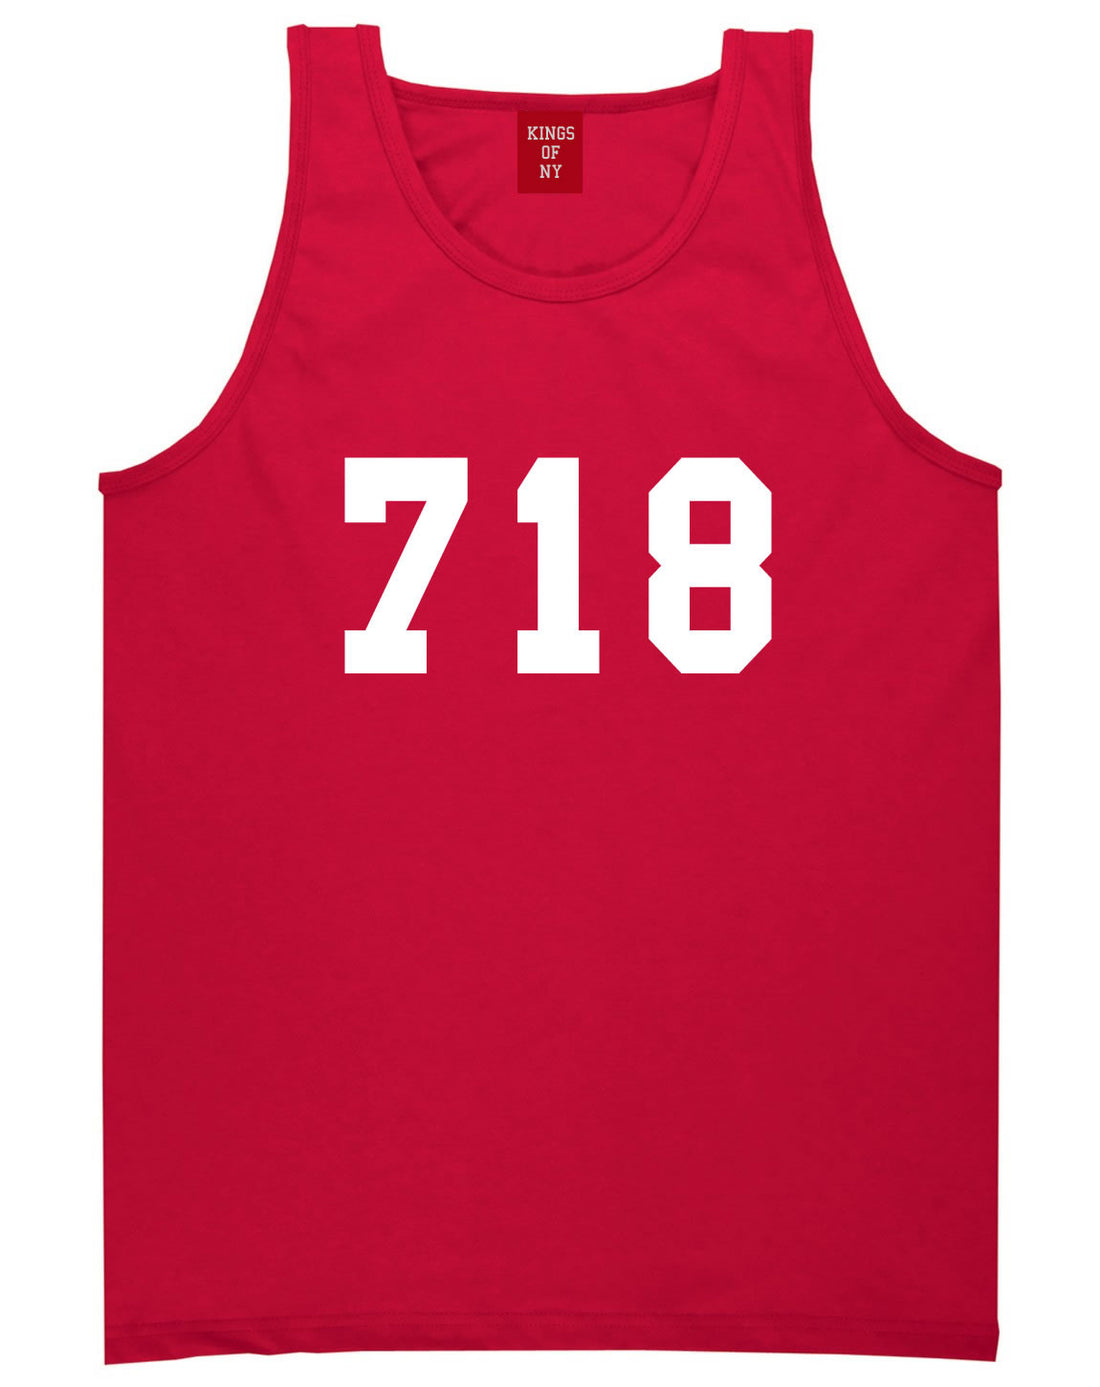 718 New York Area Code Tank Top in Red By Kings Of NY